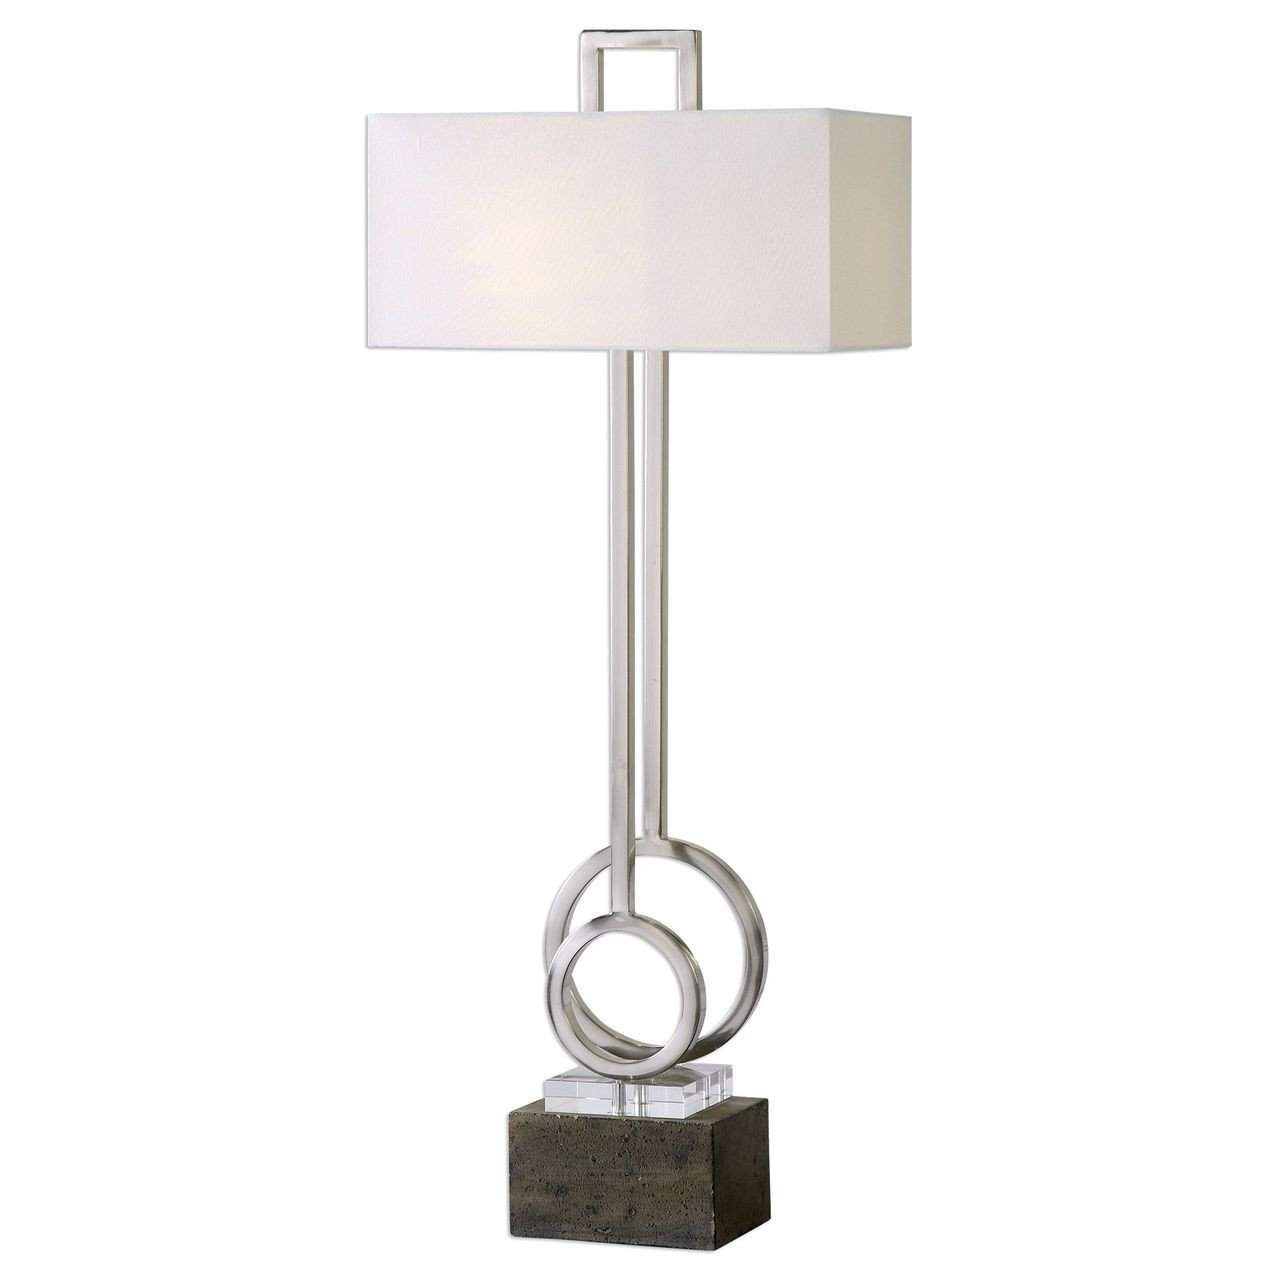 UtterMost New Product  Uttermost Deshka Brushed Nickel Table Lamp Sold by VaasuHomes